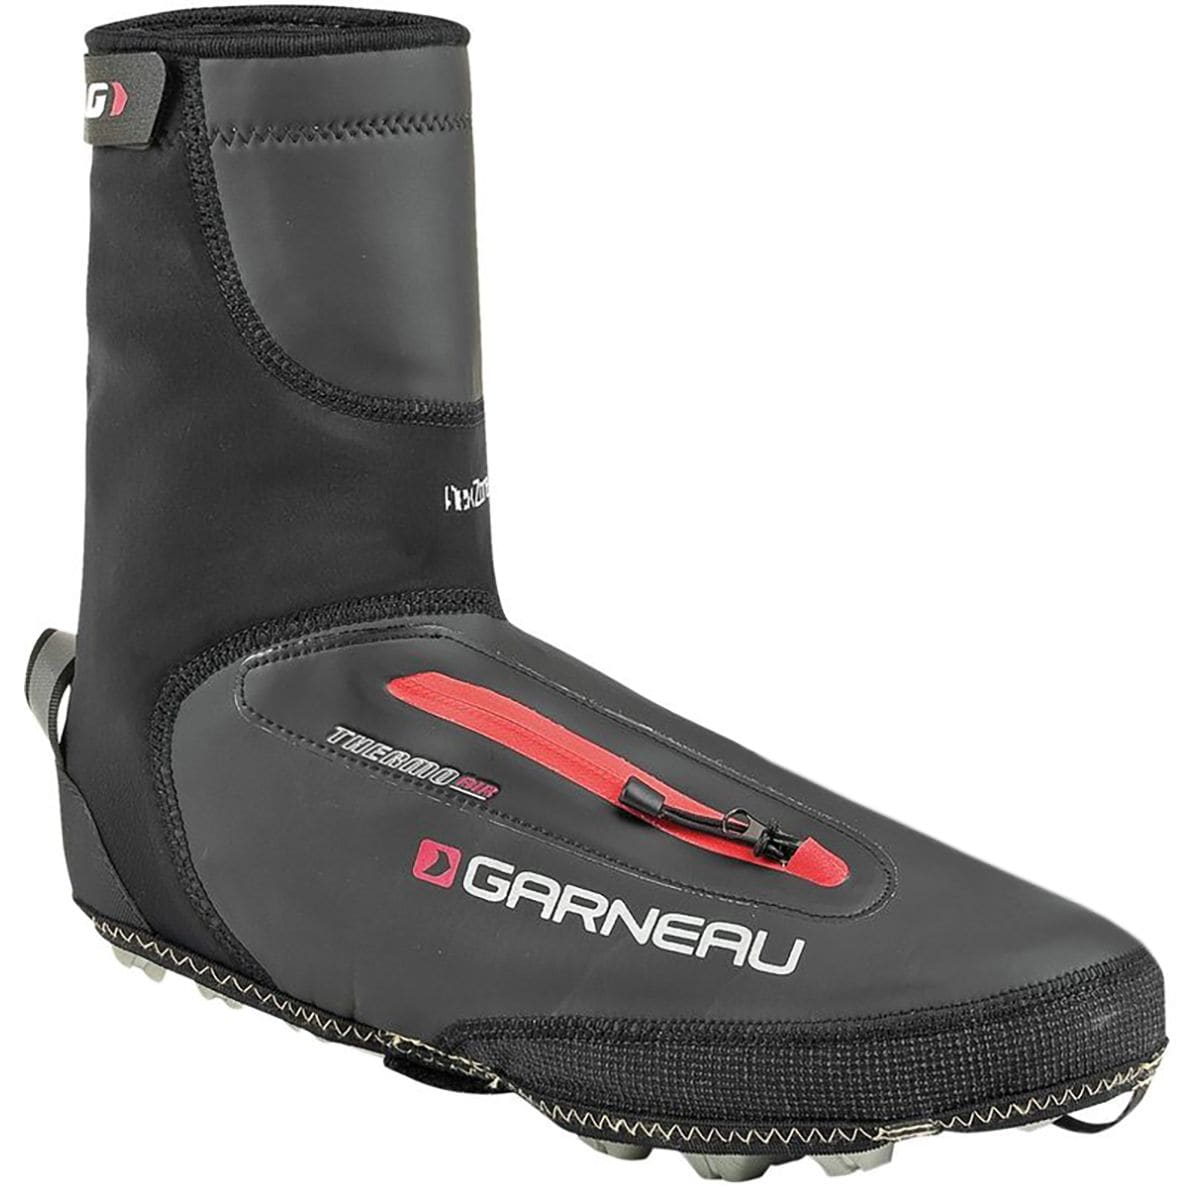 Louis Garneau Thermax Shoe Covers | Competitive Cyclist